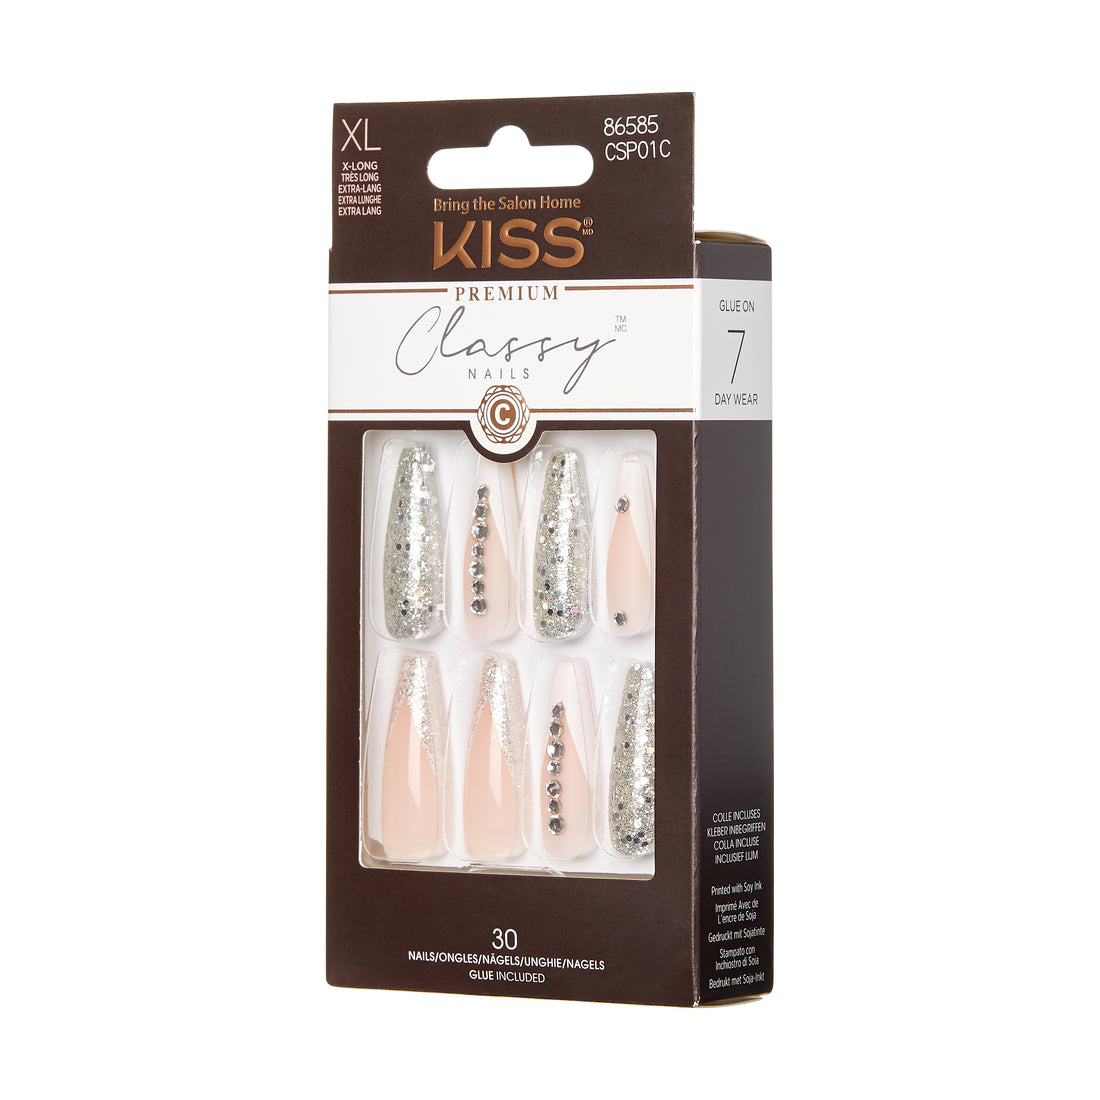 KISS Premium Classy Nails - Sophisticated